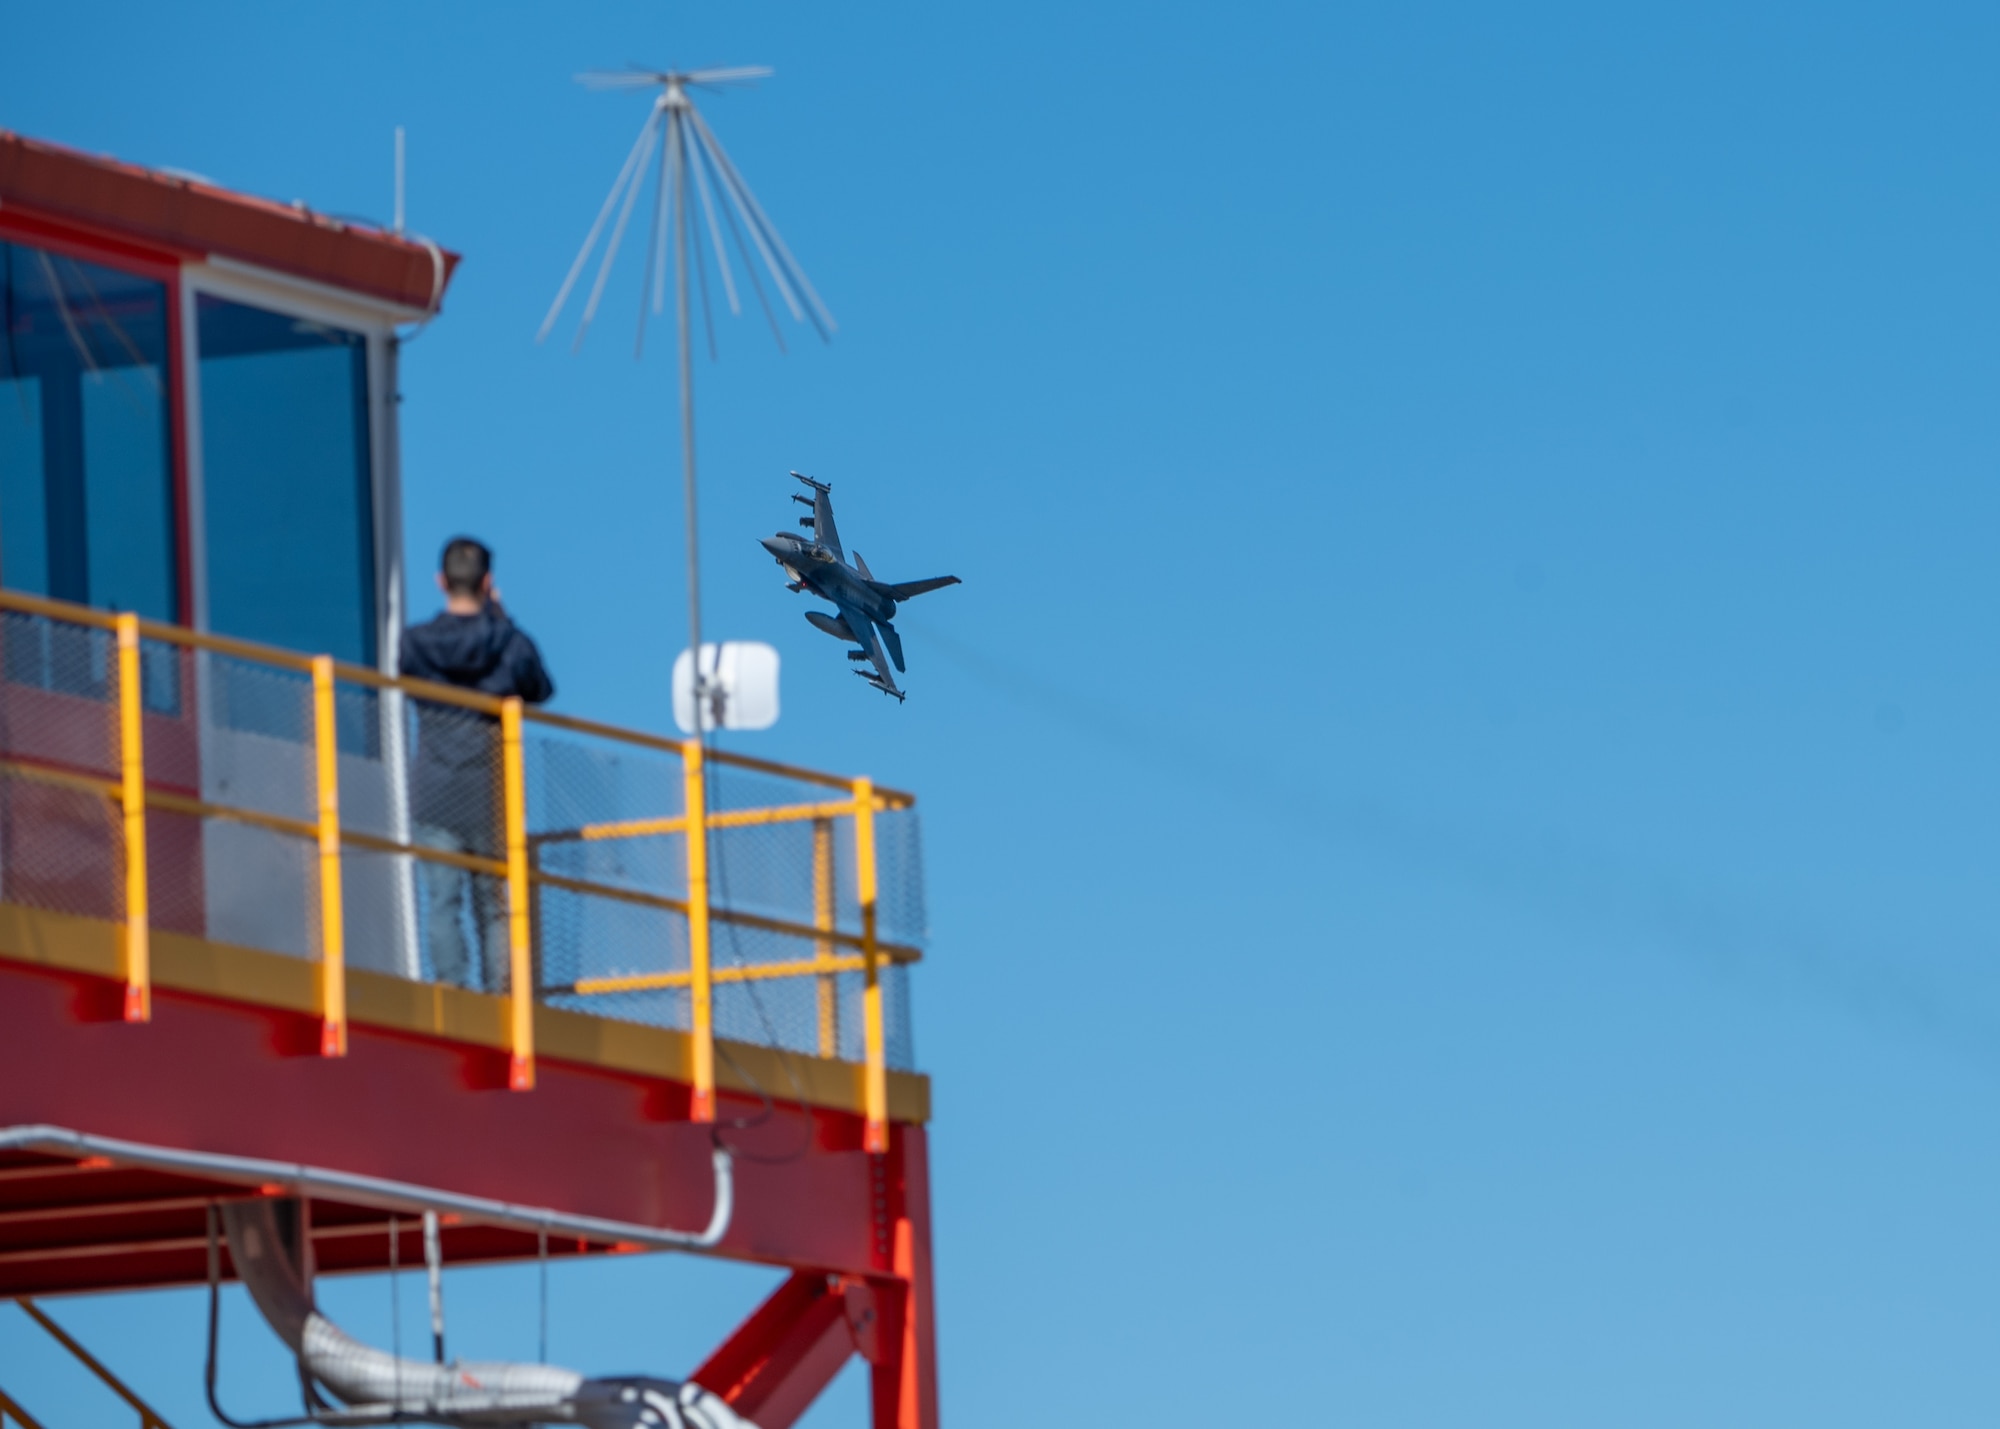 A man on an air traffic control tower stands on the balcony observing a jet as it passes behind the tower.